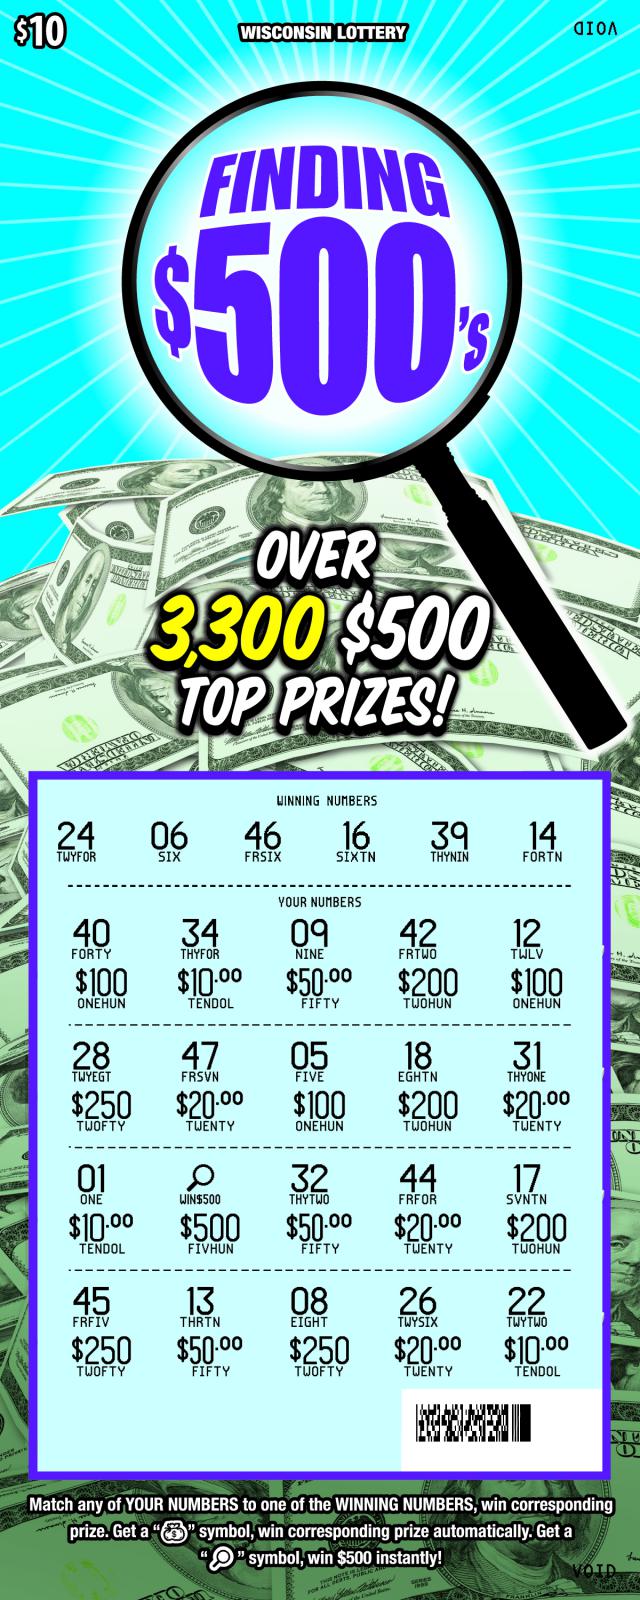 Finding $500's instant scratch ticket from Wisconsin Lottery - scratched